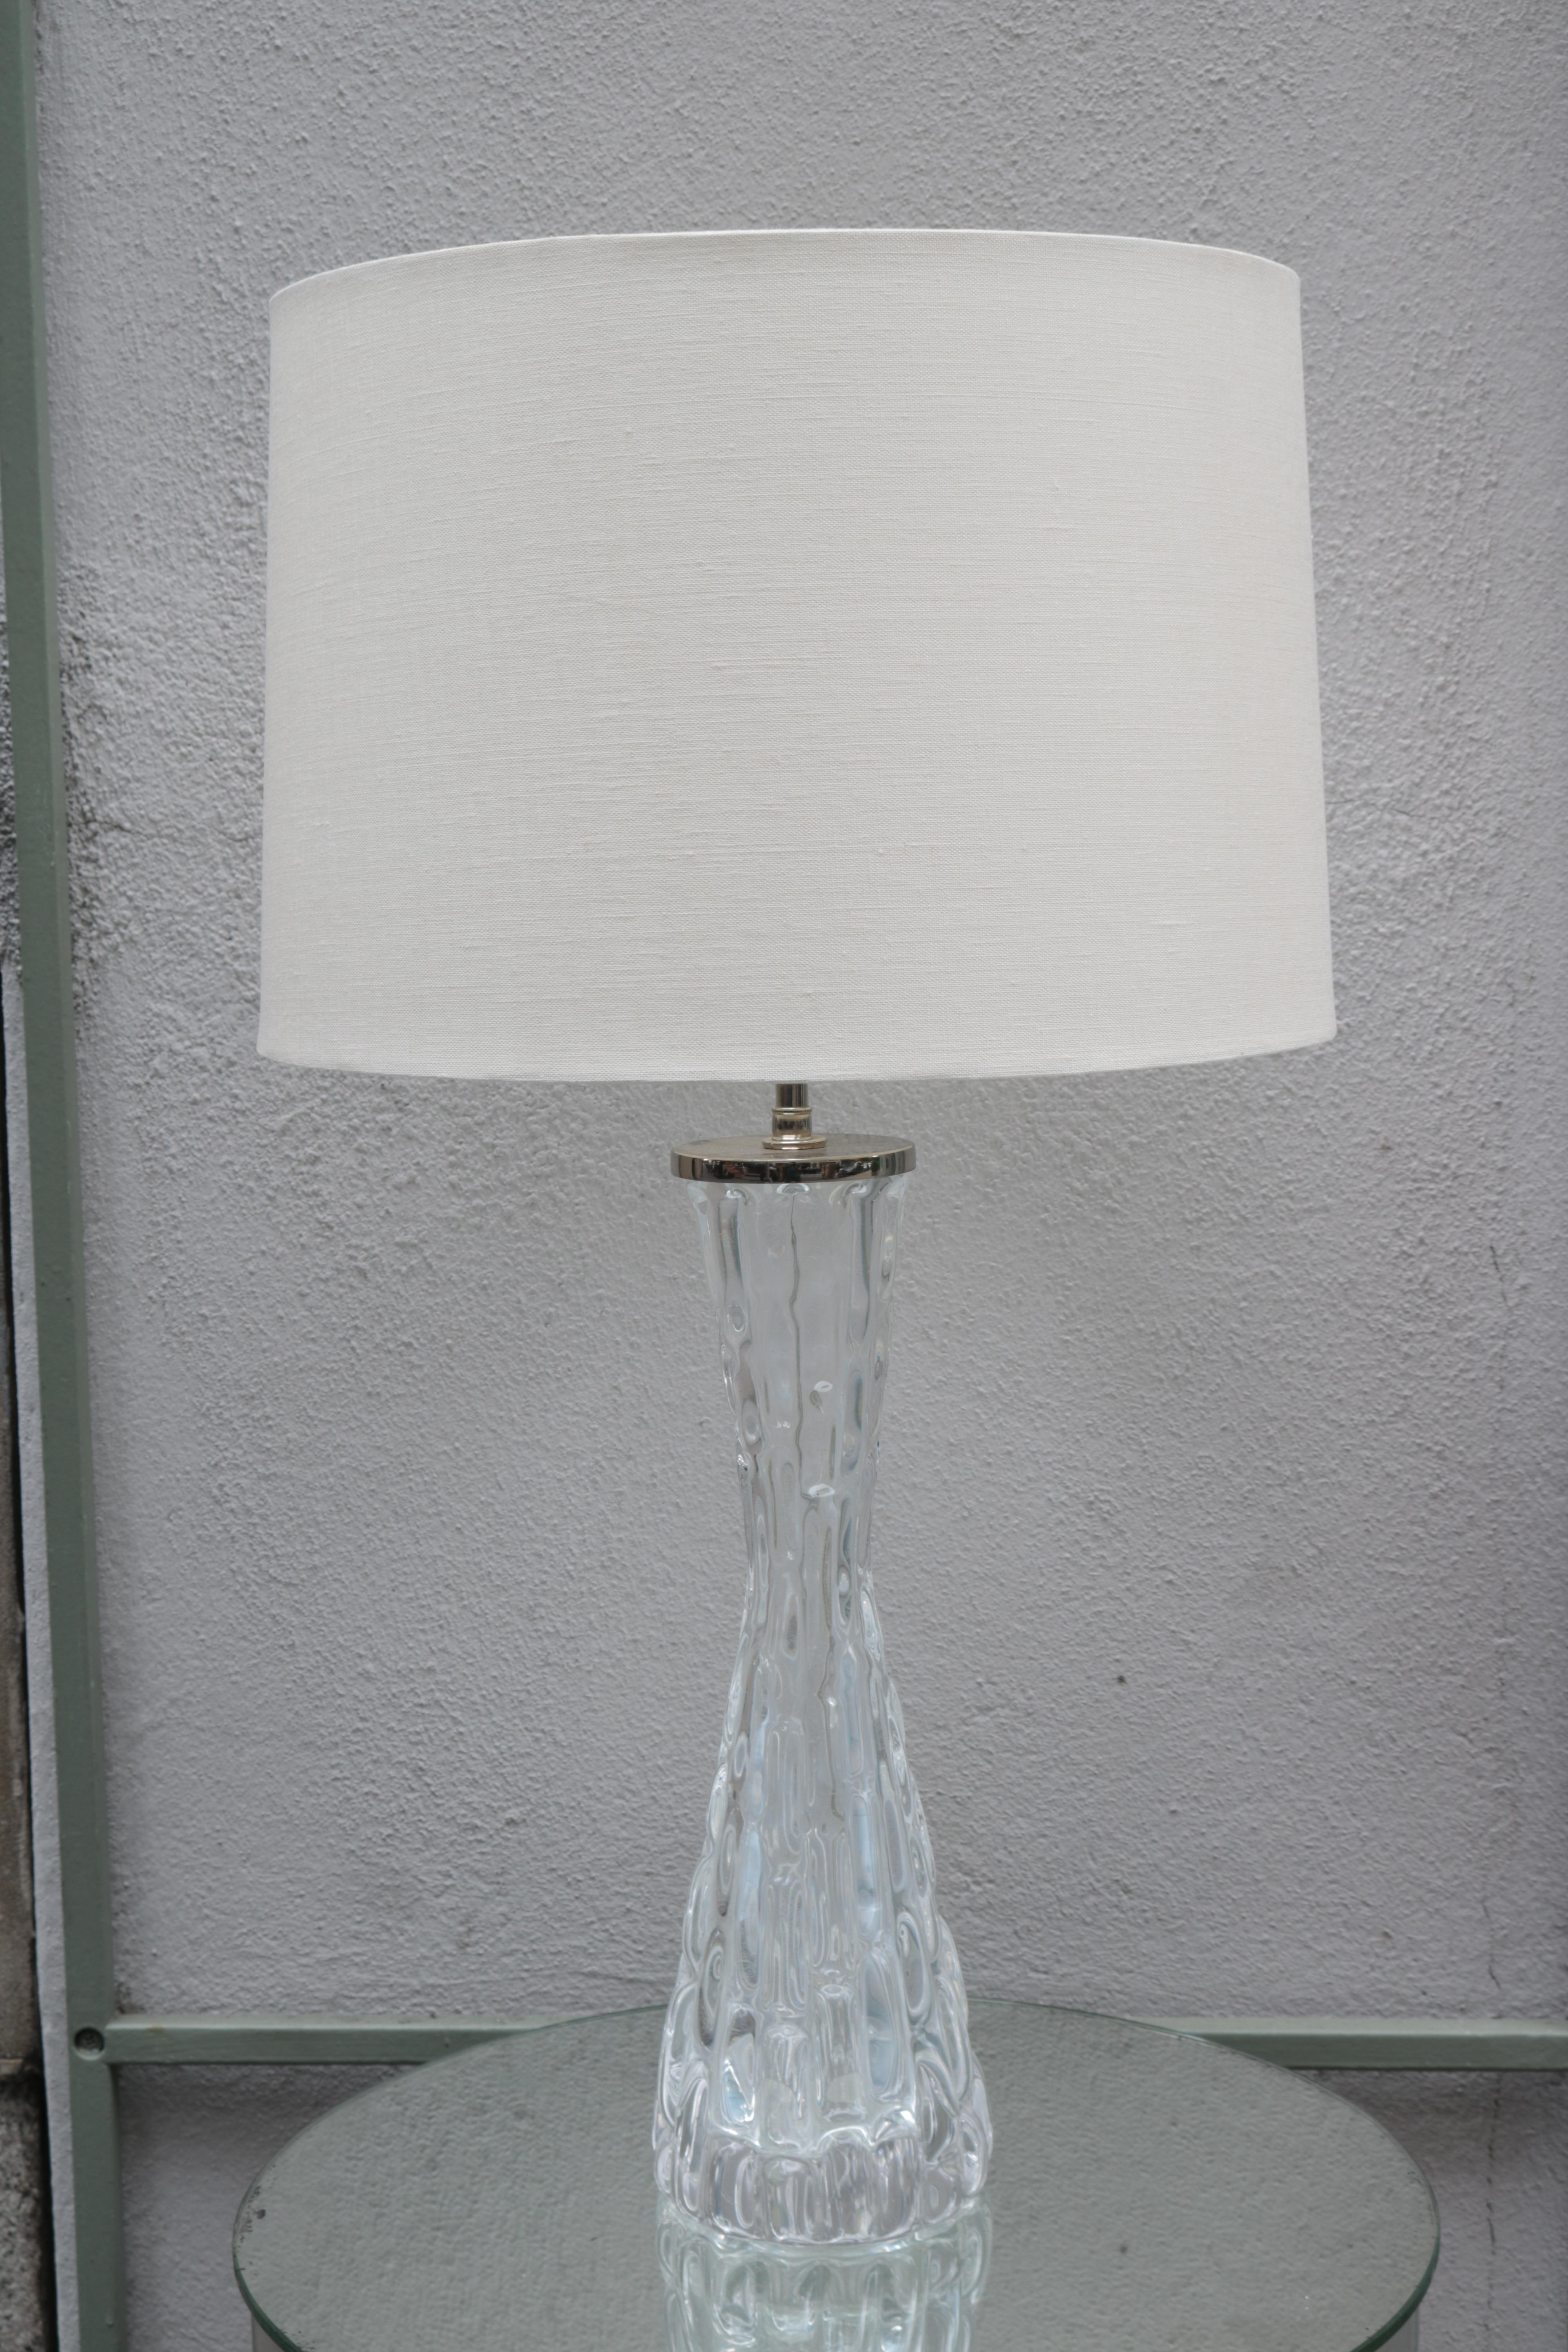 A pair of Orrefors Modernist crystal table lamps with Orrefors signature.
Crystal with chrome details.